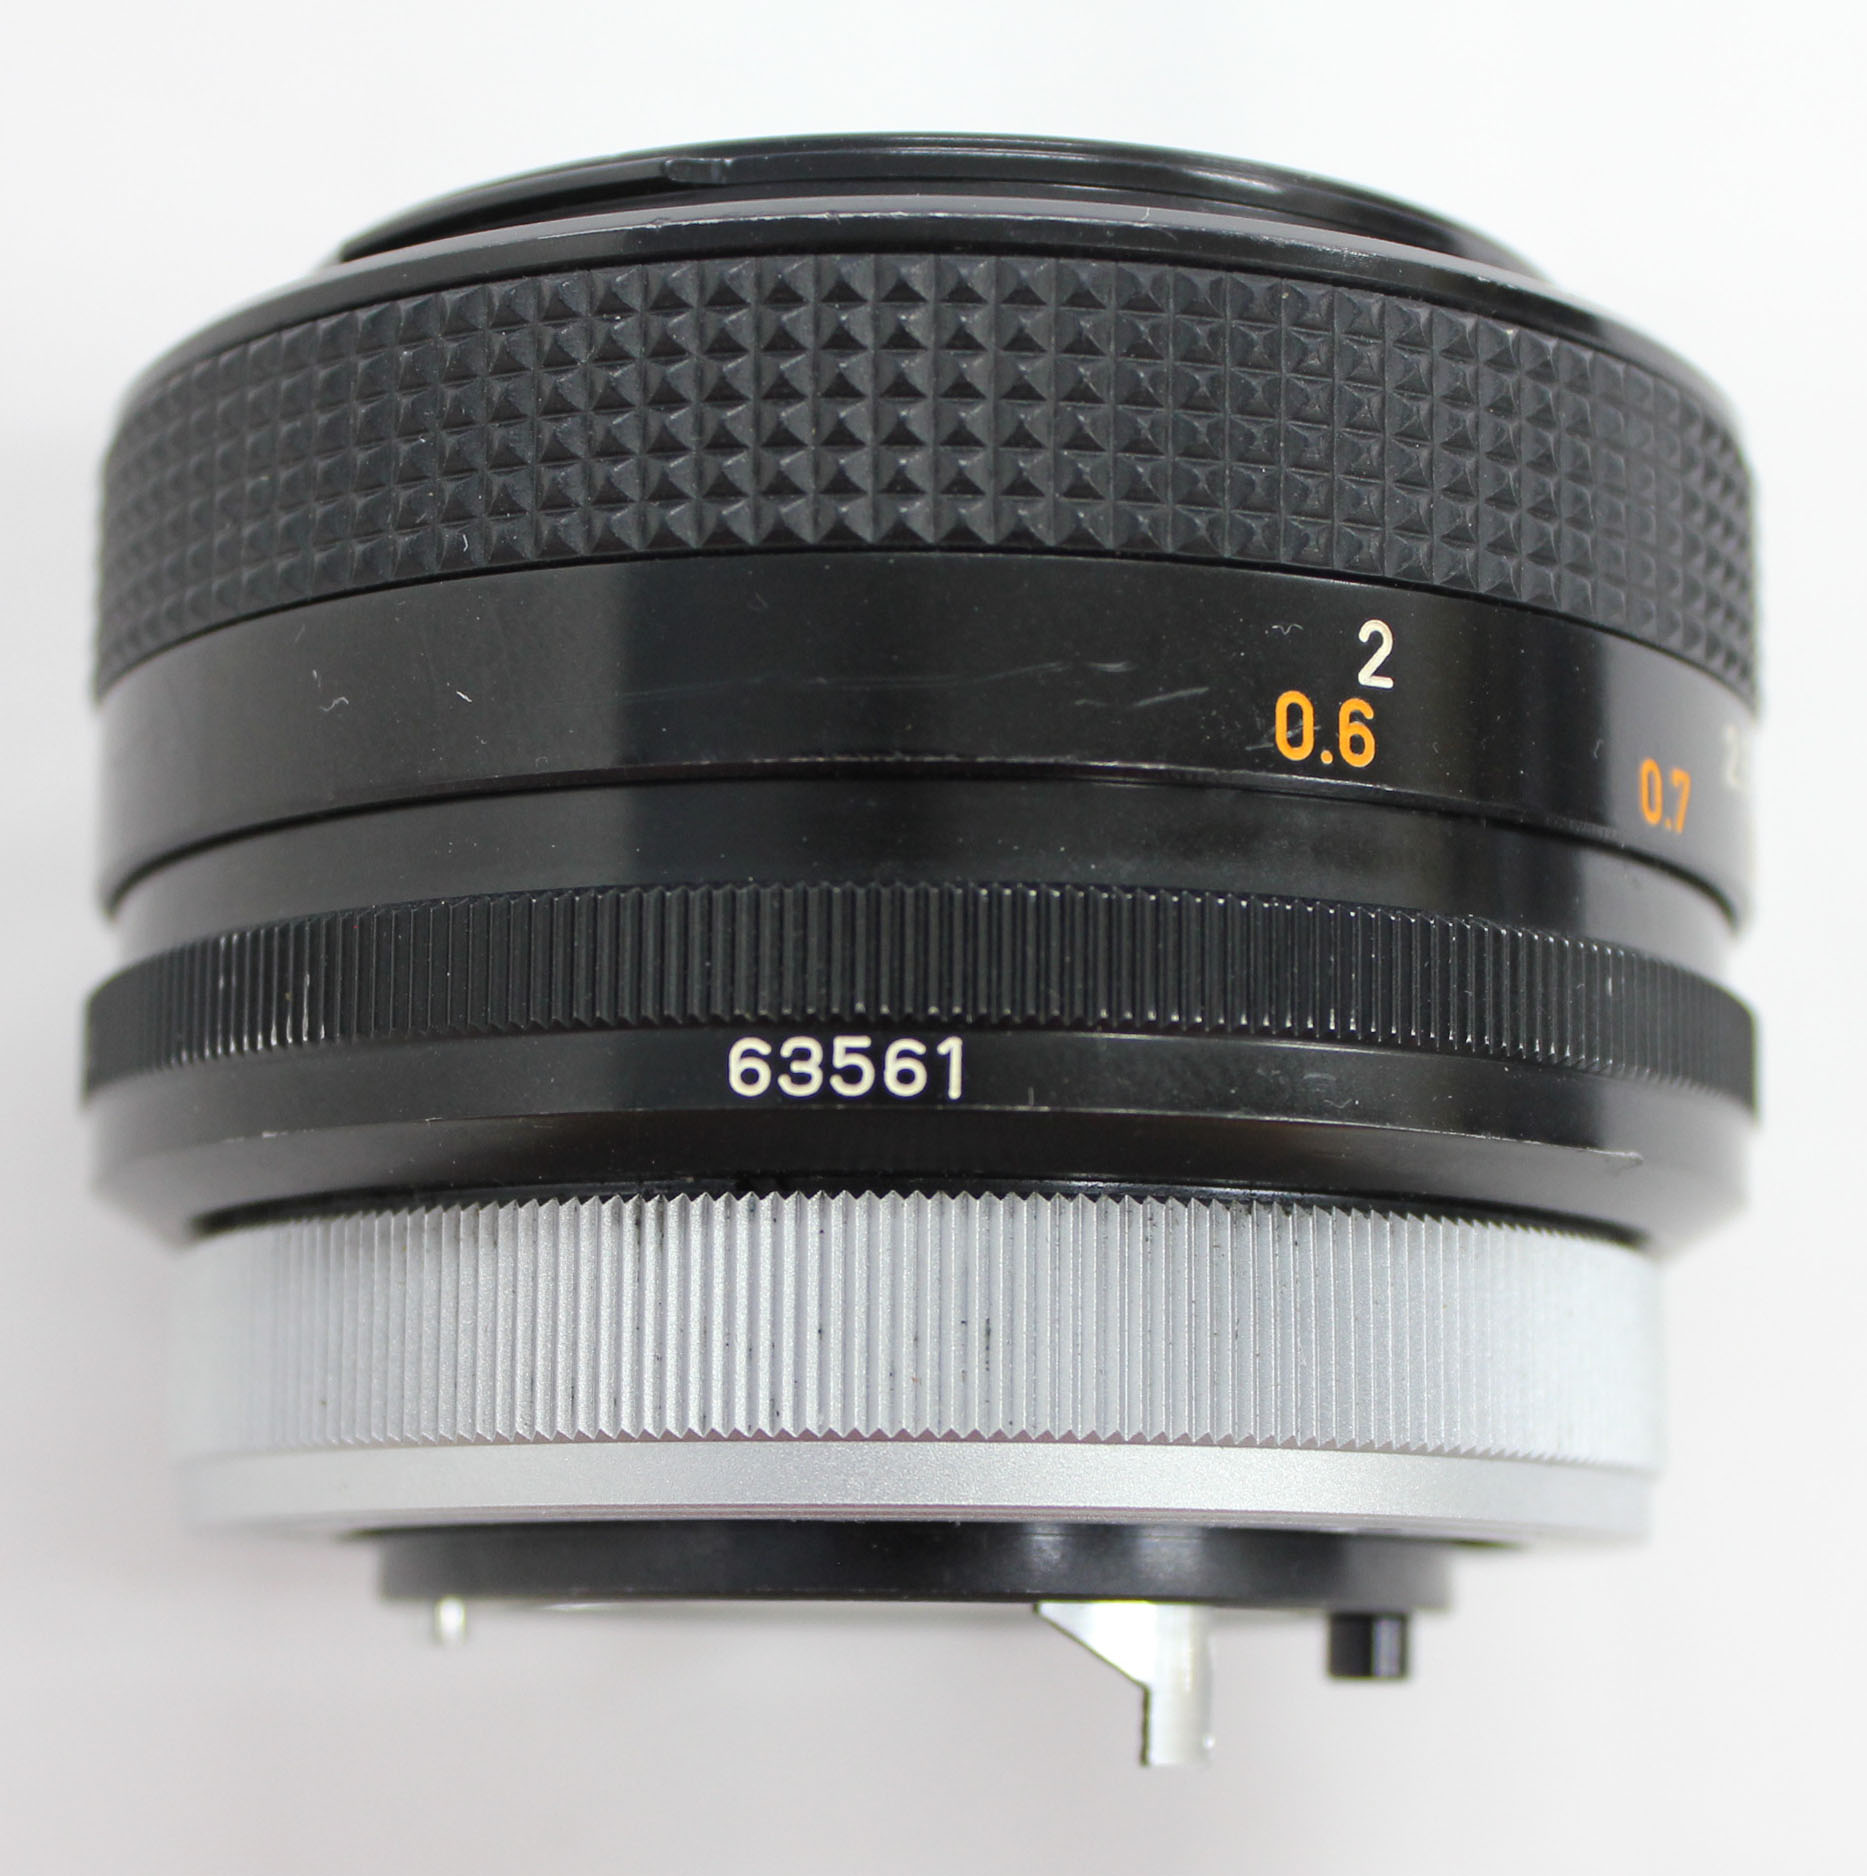  Canon FD 55mm F/1.2 S.S.C. ssc MF Standard Prime Lens from Japan Photo 6